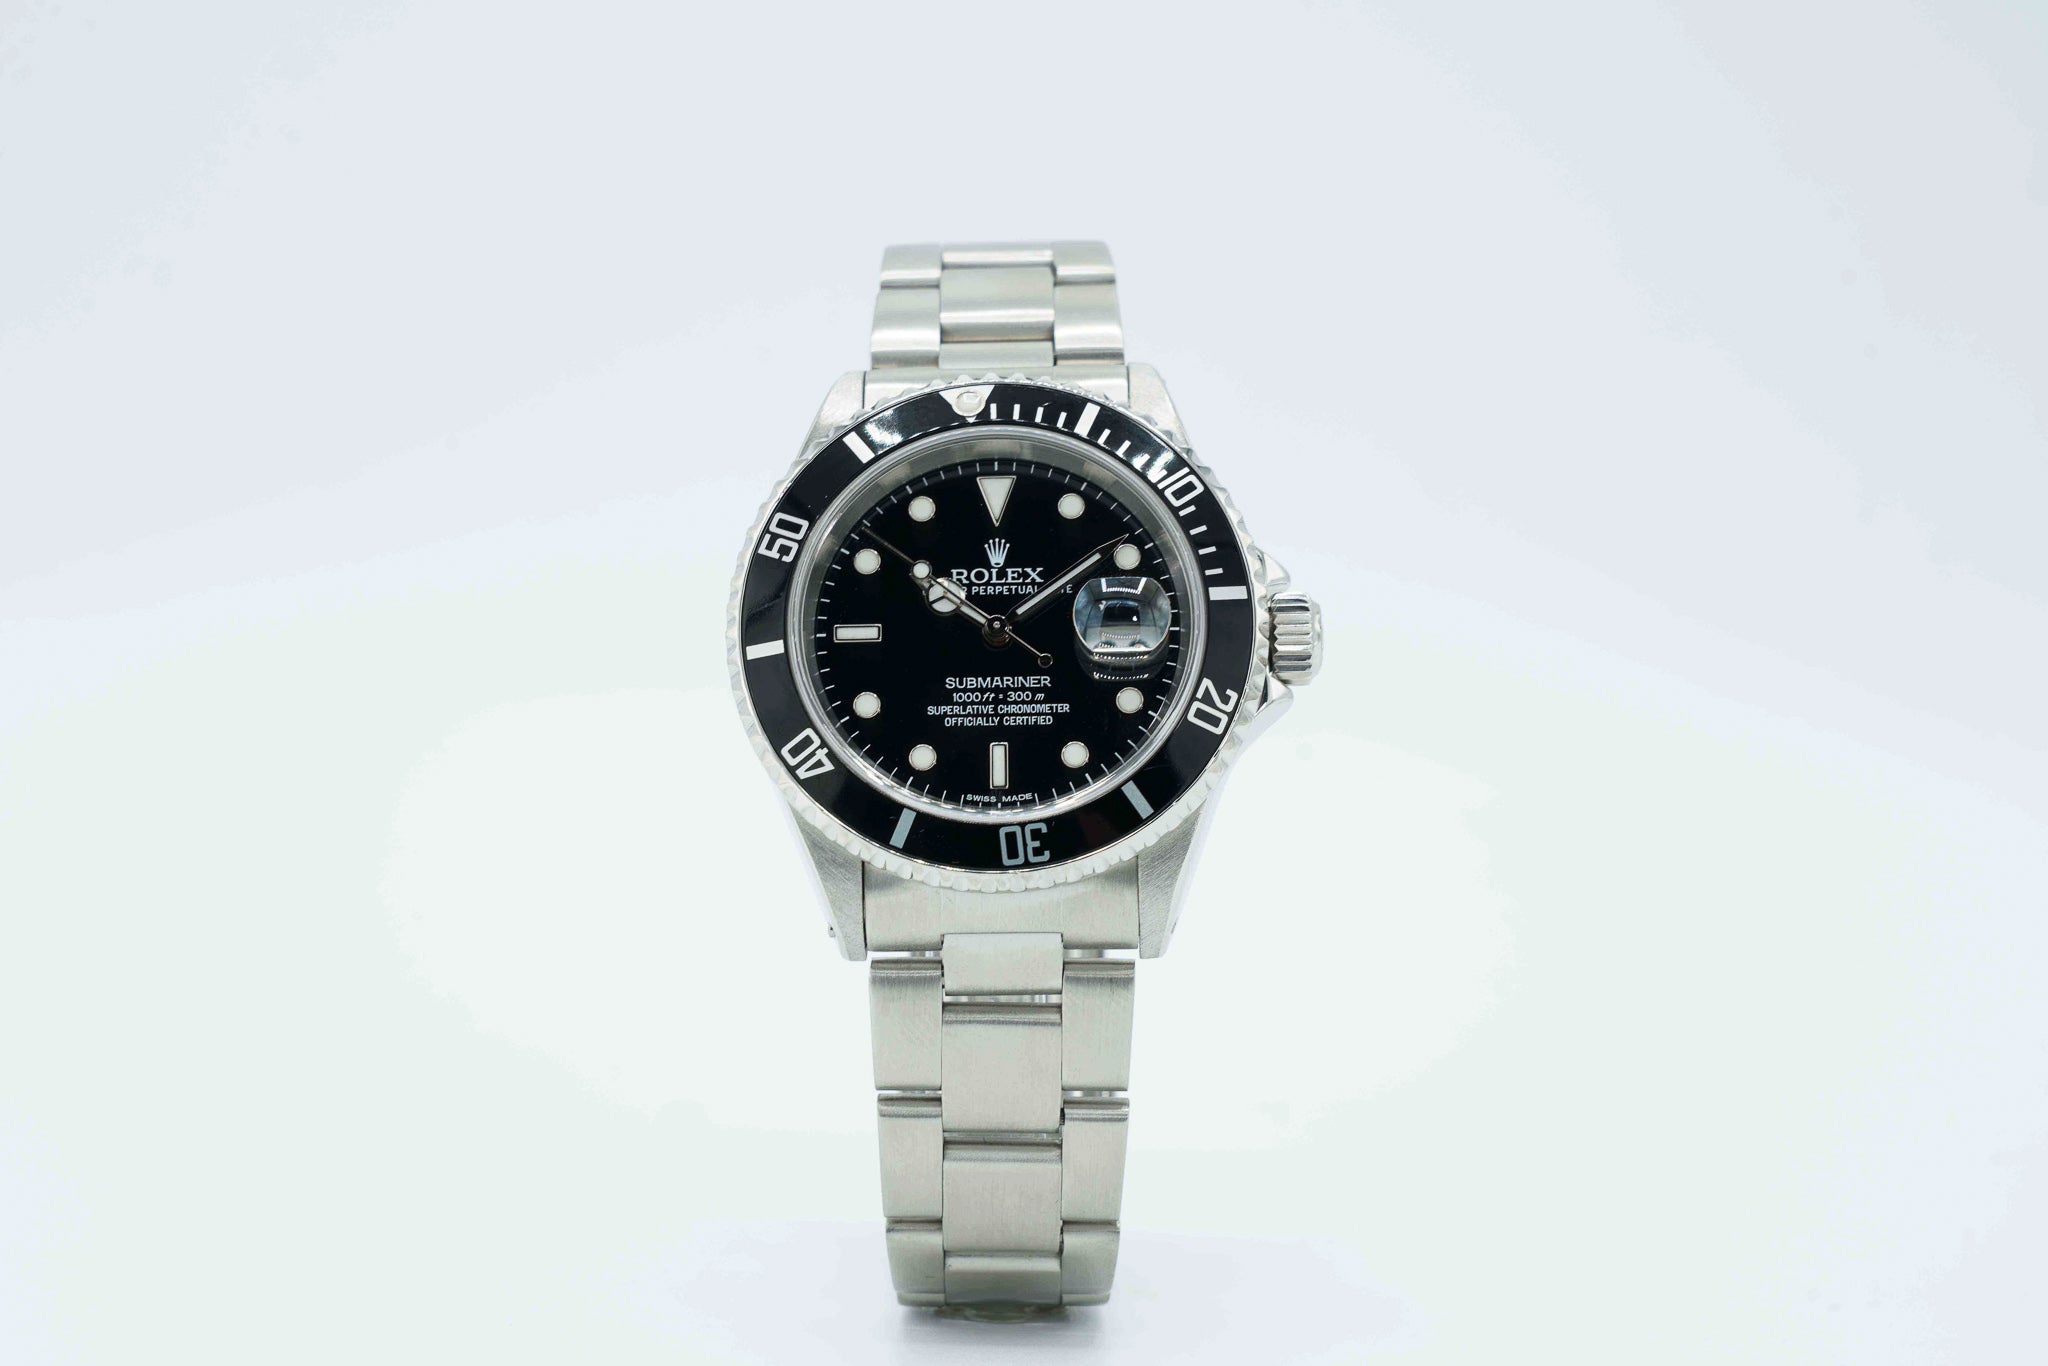 Rolex Submariner w/ Black Dial 36mm Service Card included